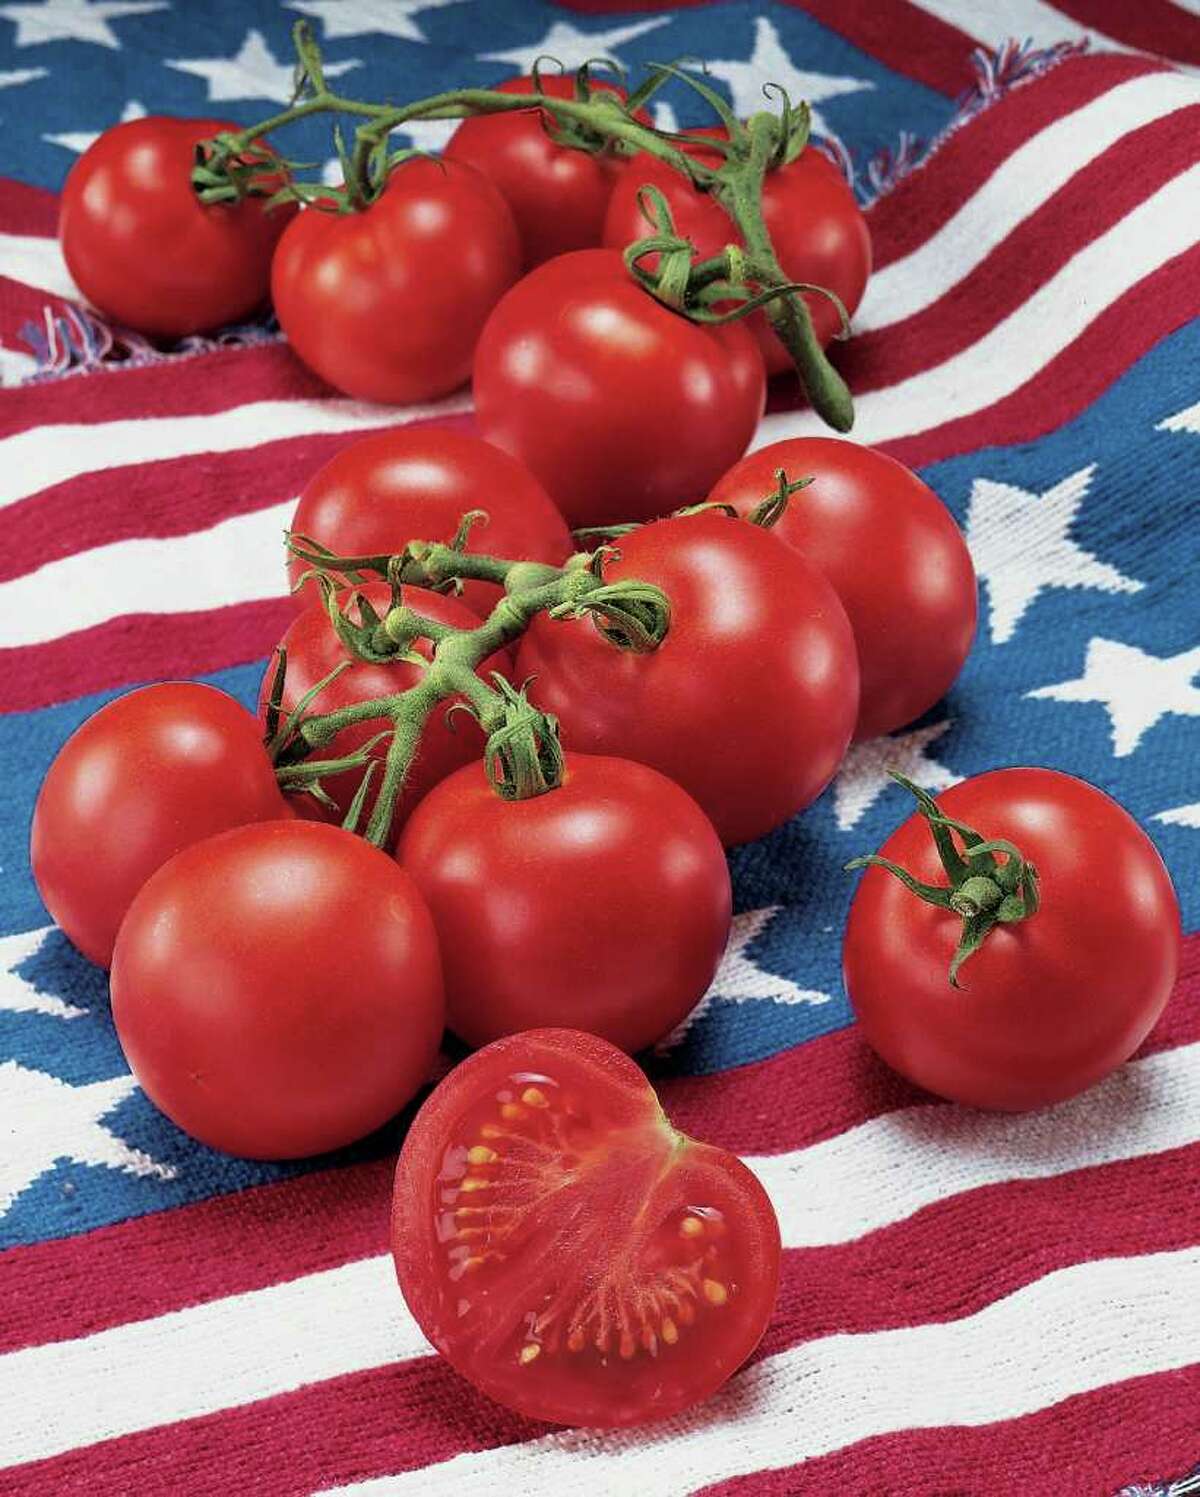 'Fourth of July' tomato